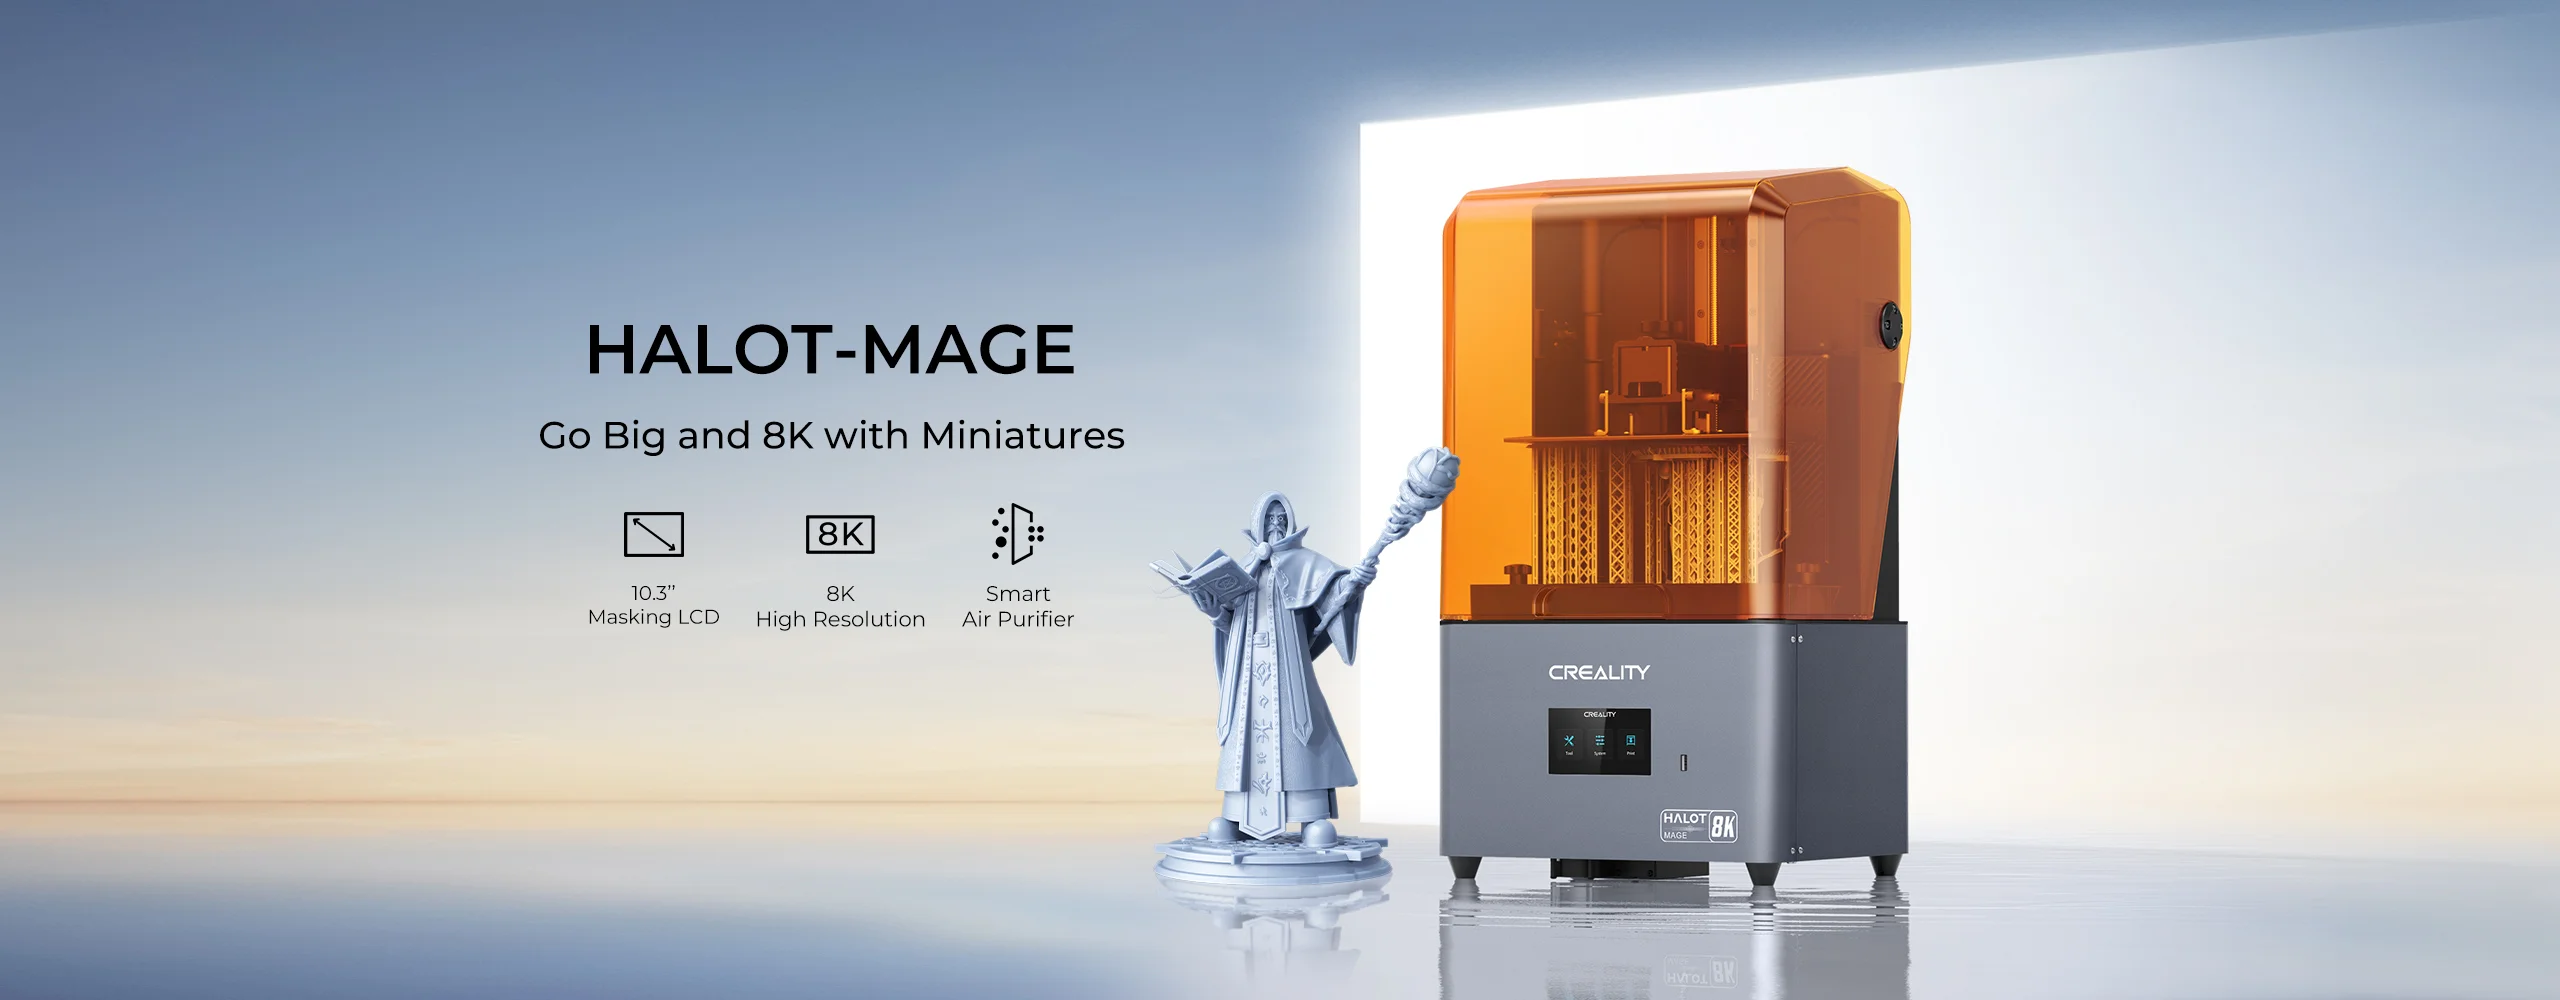 Halot Mage and Creality K1 launched in India